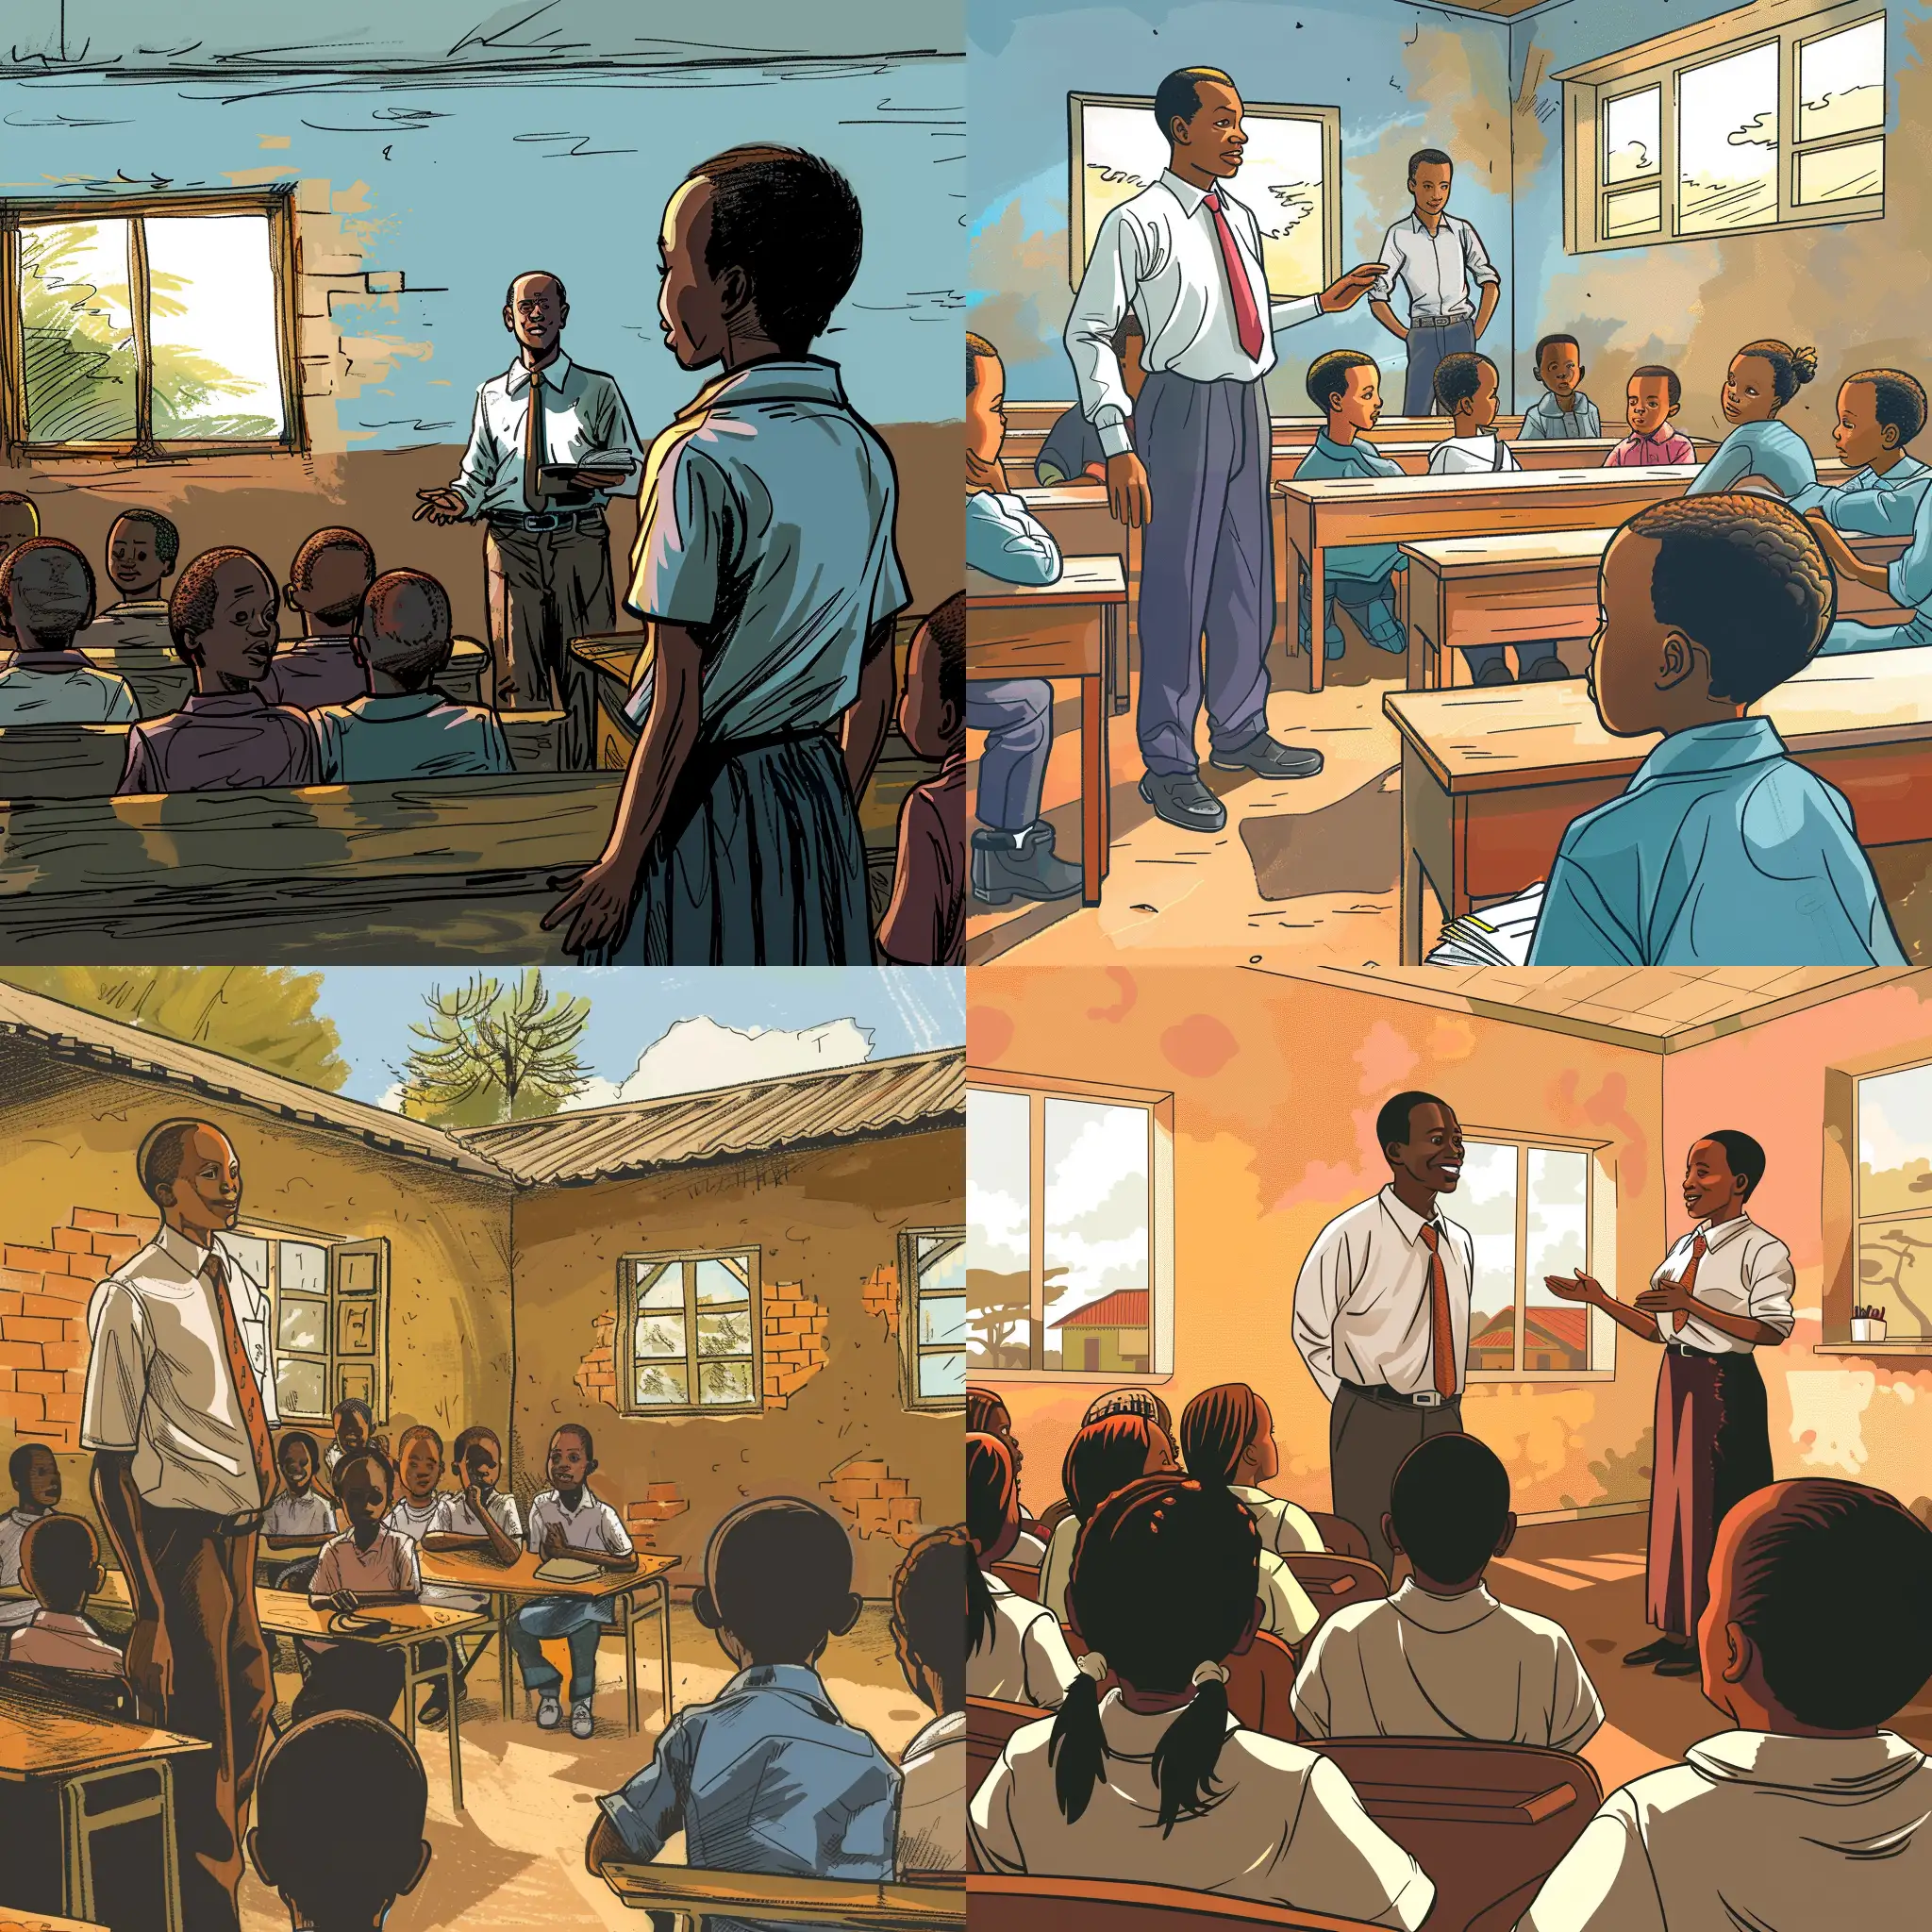 In class, 10 years old, in school, participating in a lively discussion, teacher standing in front of class, setting in Kenya, cartoon.